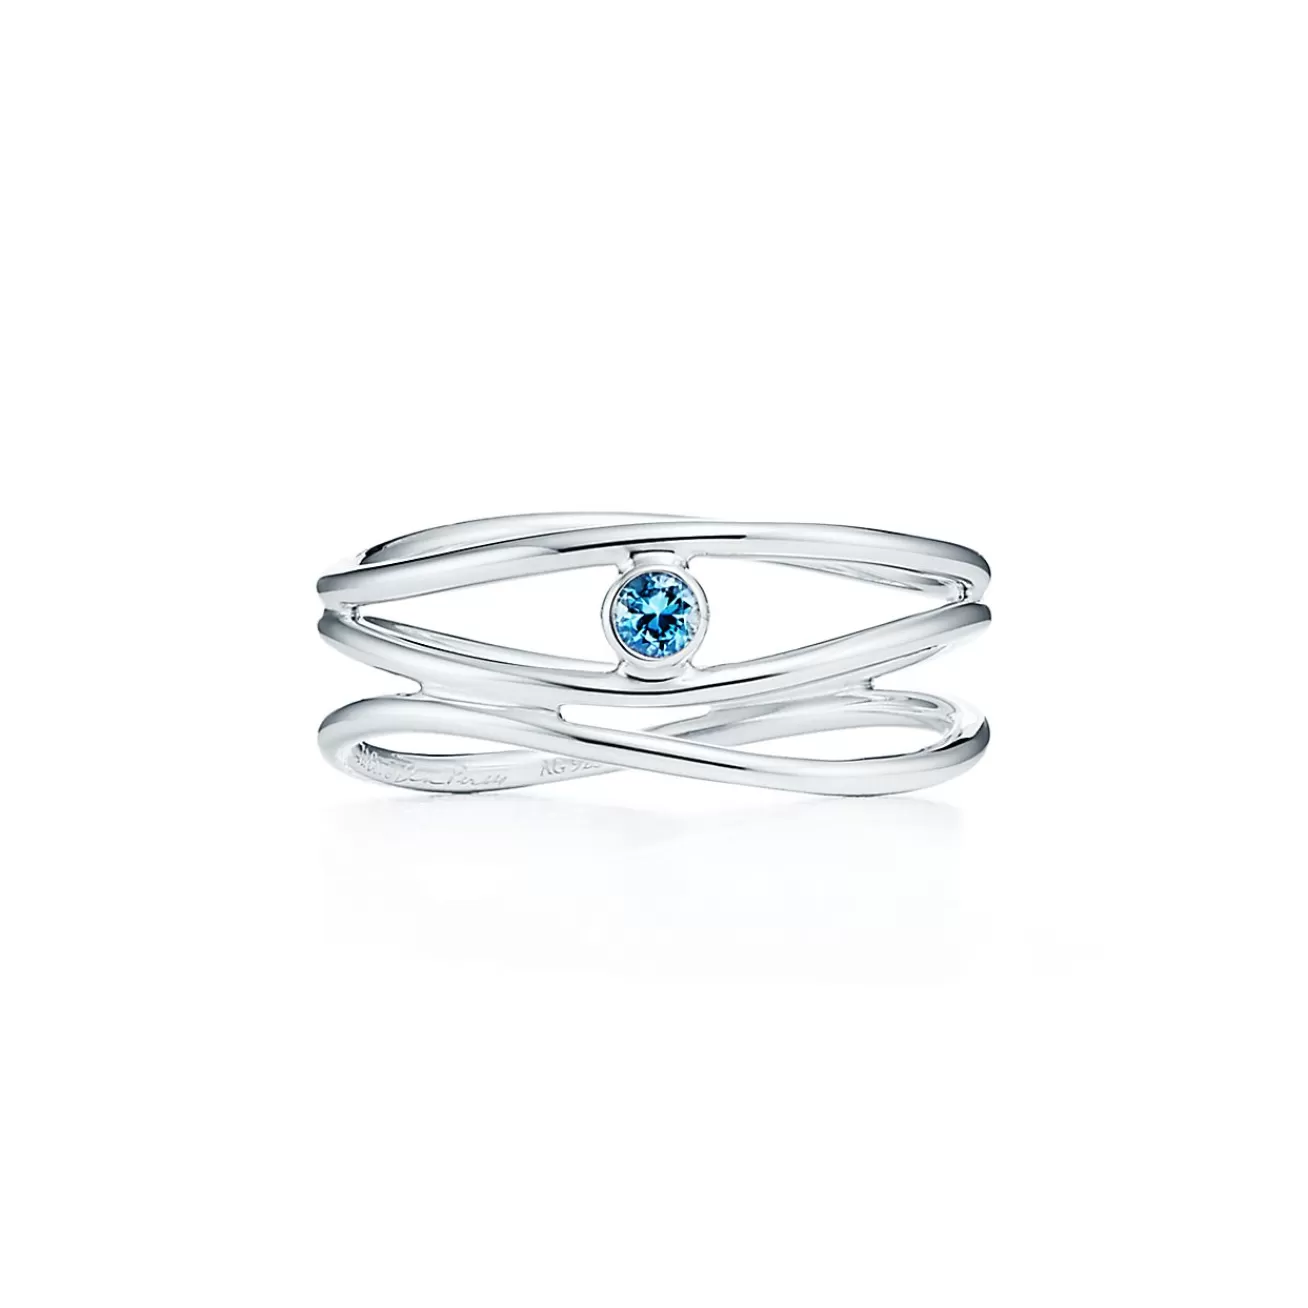 Tiffany & Co. Elsa Peretti® Wave three-row ring in sterling silver with an aquamarine. | ^ Rings | Sterling Silver Jewelry